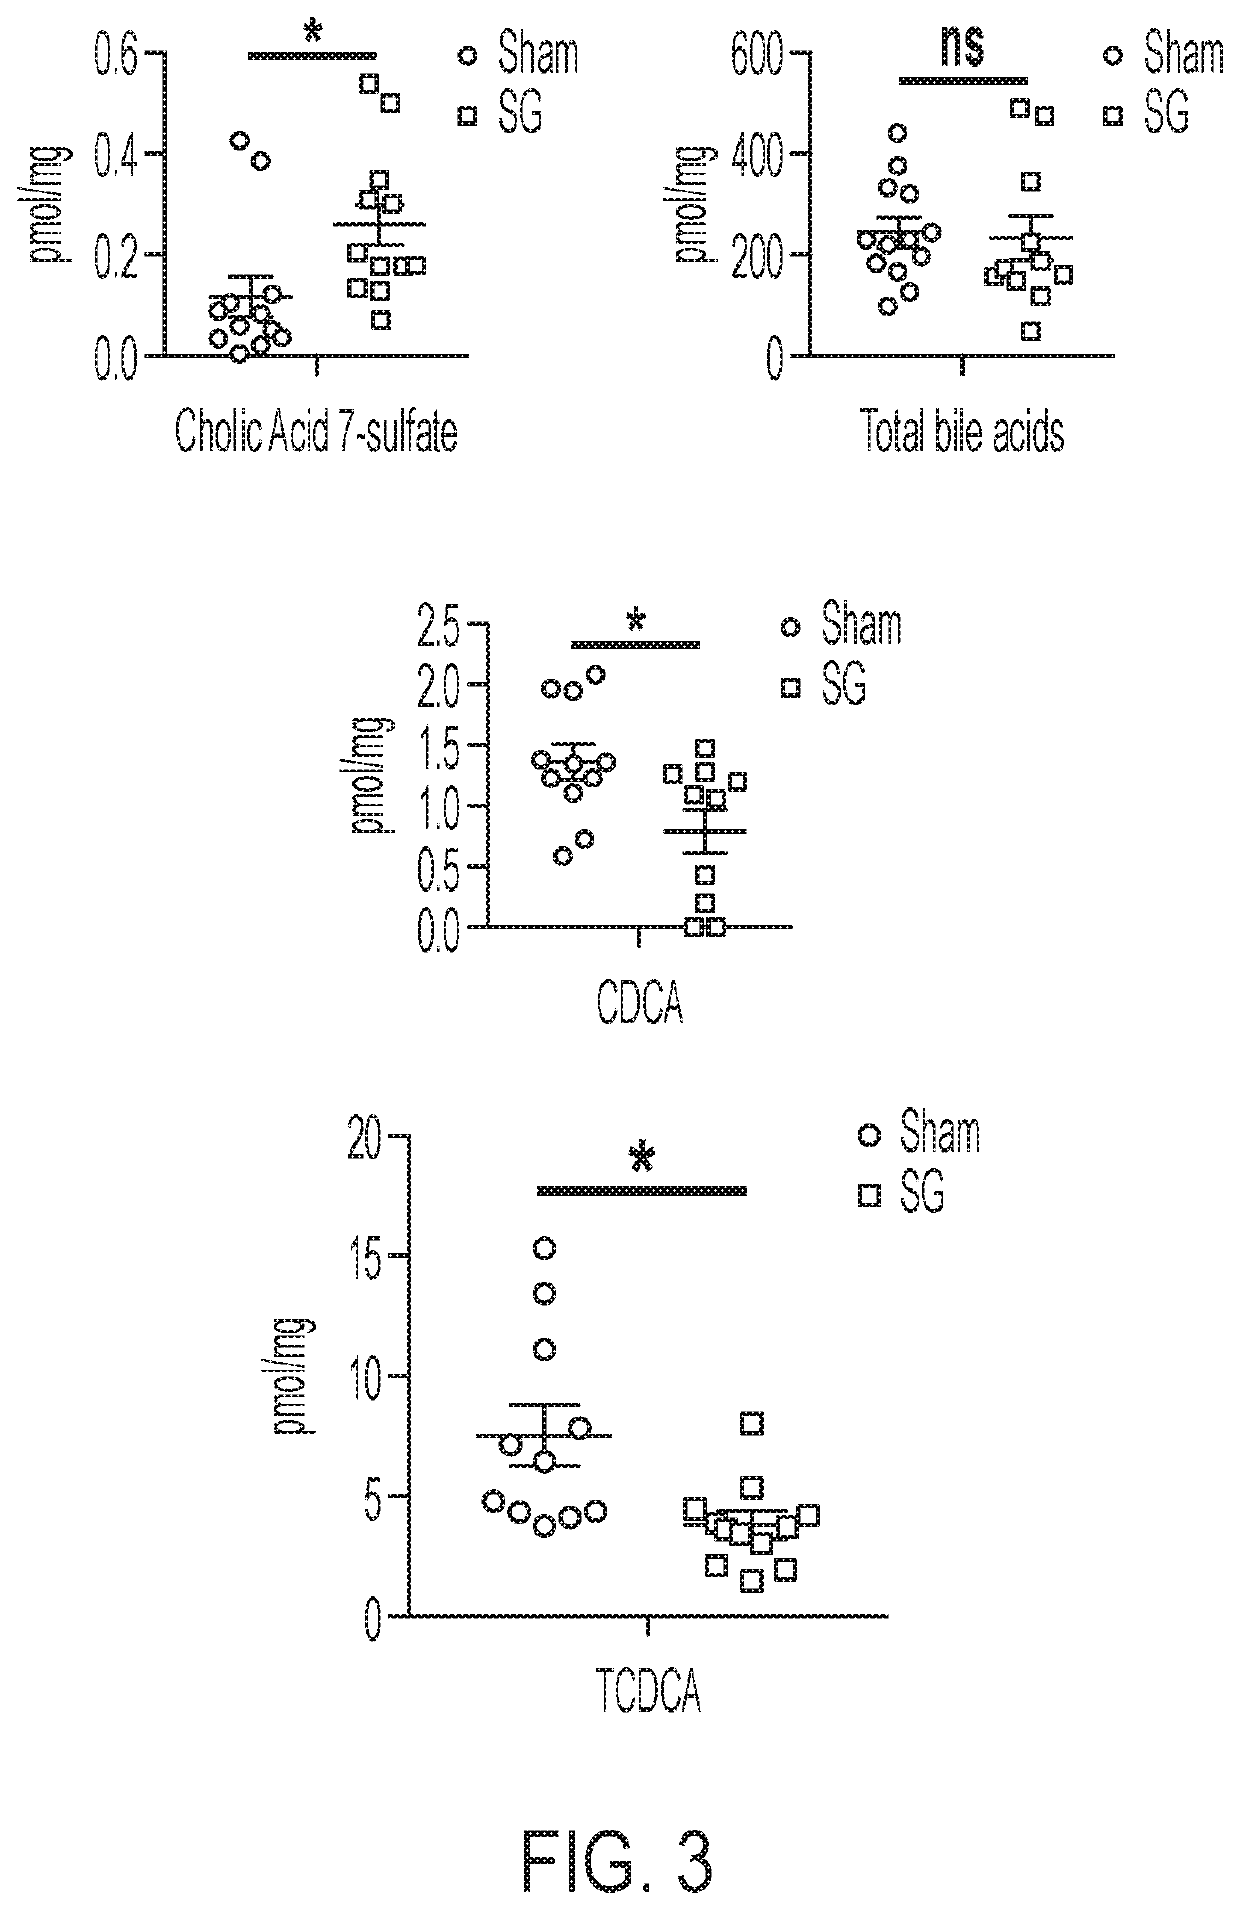 Compositions and methods related to cholic acid 7-sulfate as a treatment for diabetes